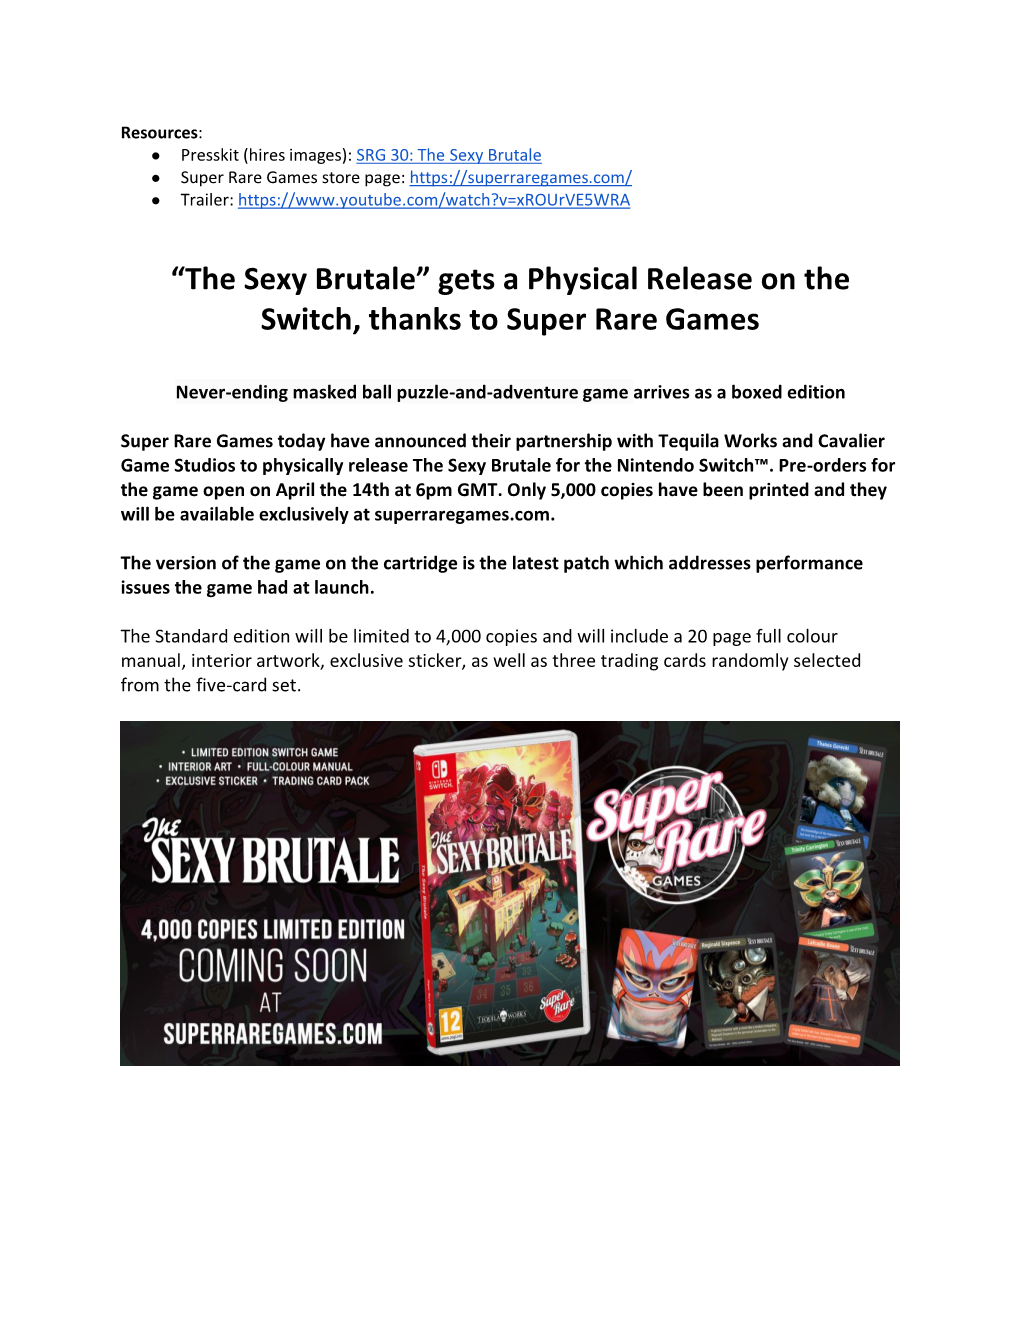 “The Sexy Brutale” Gets a Physical Release on the Switch, Thanks to Super Rare Games